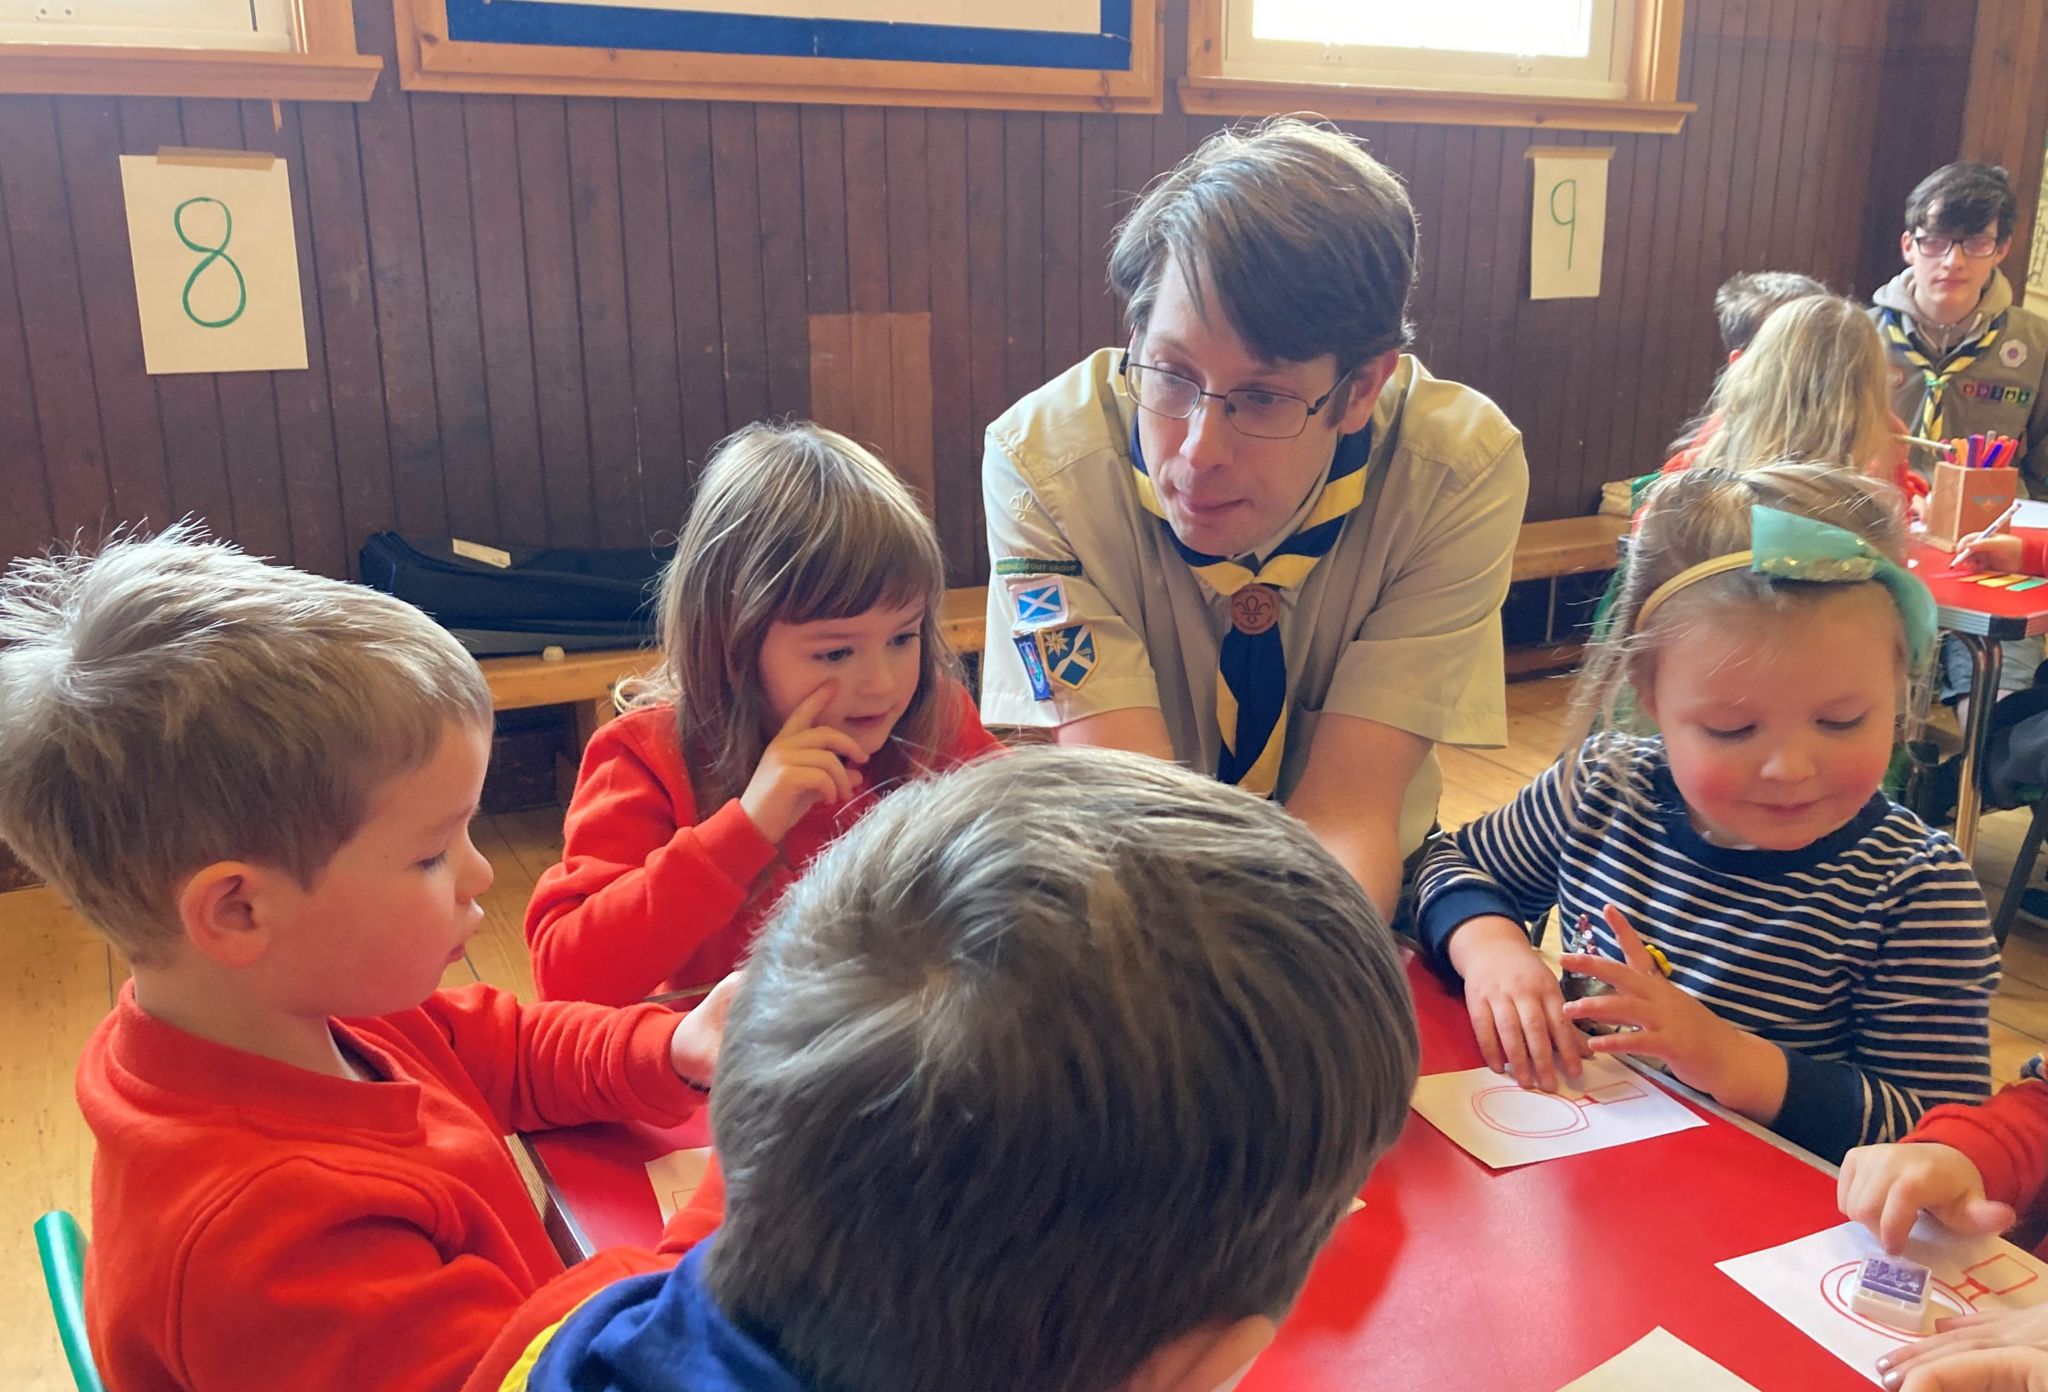 Explorer Scouts help out as leaders for younger sections.